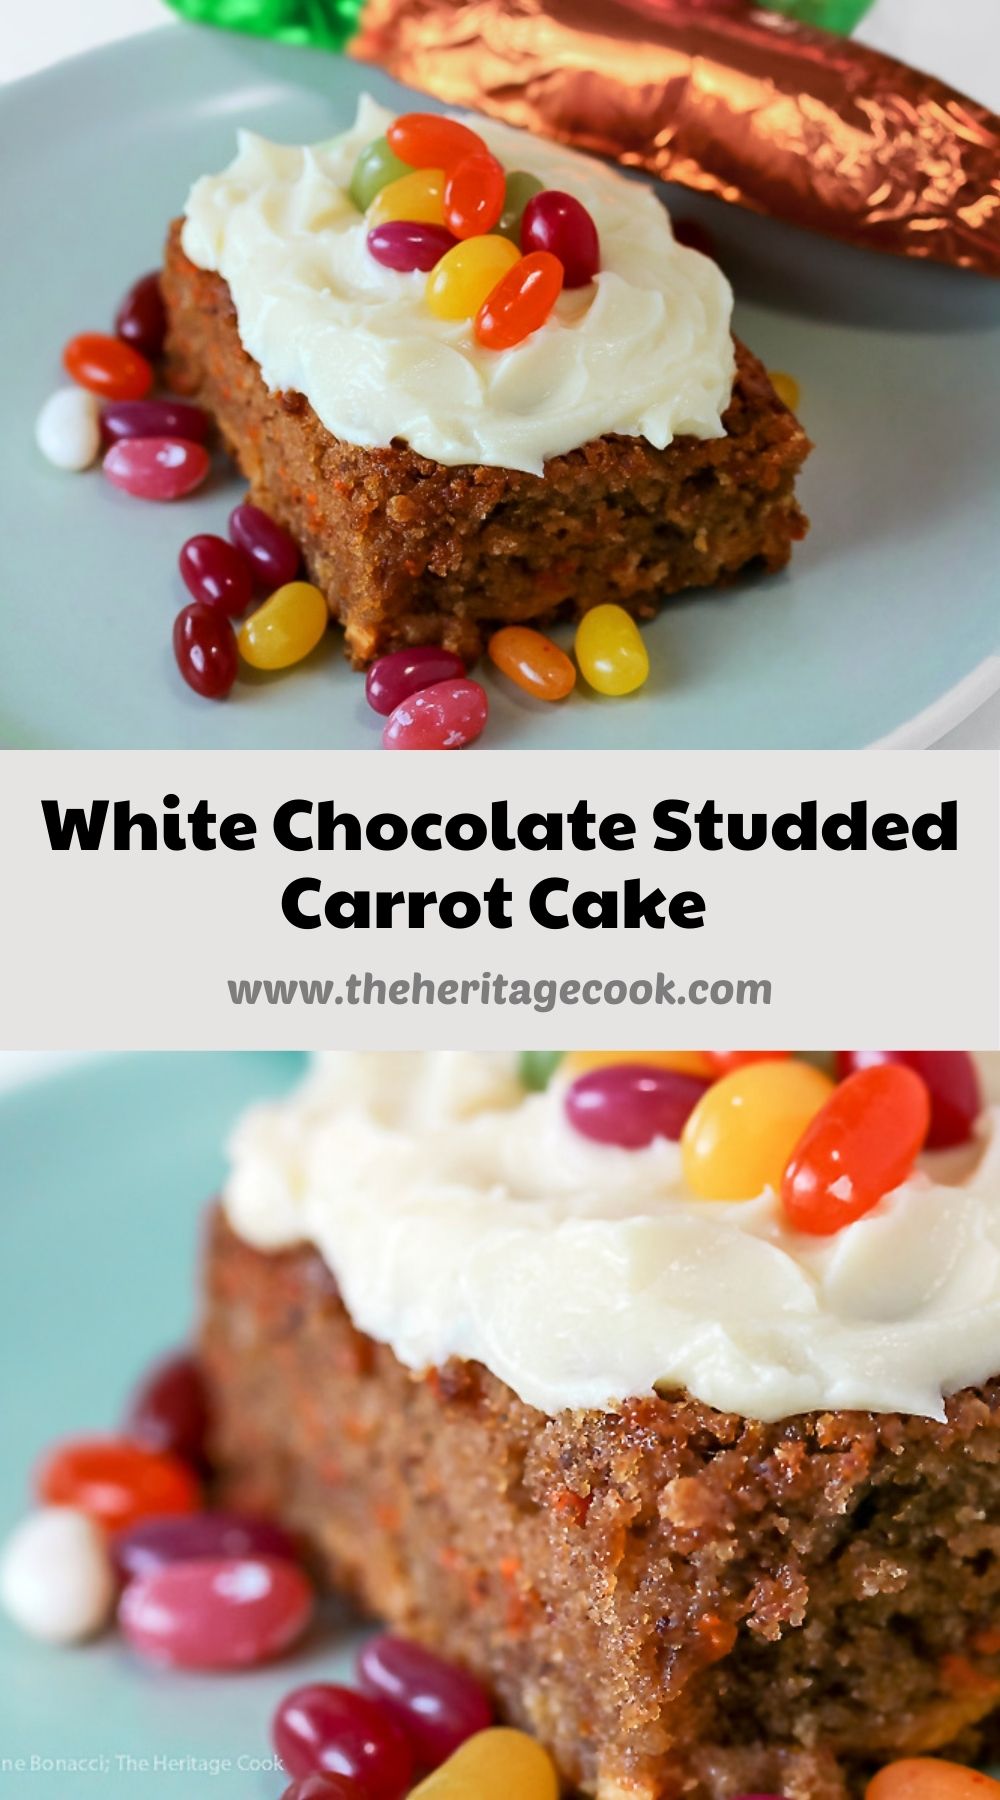 White Chocolate Studded Carrot Cake with Cream Cheese Frosting for Easter; © 2021 Jane Bonacci, The Heritage Cook